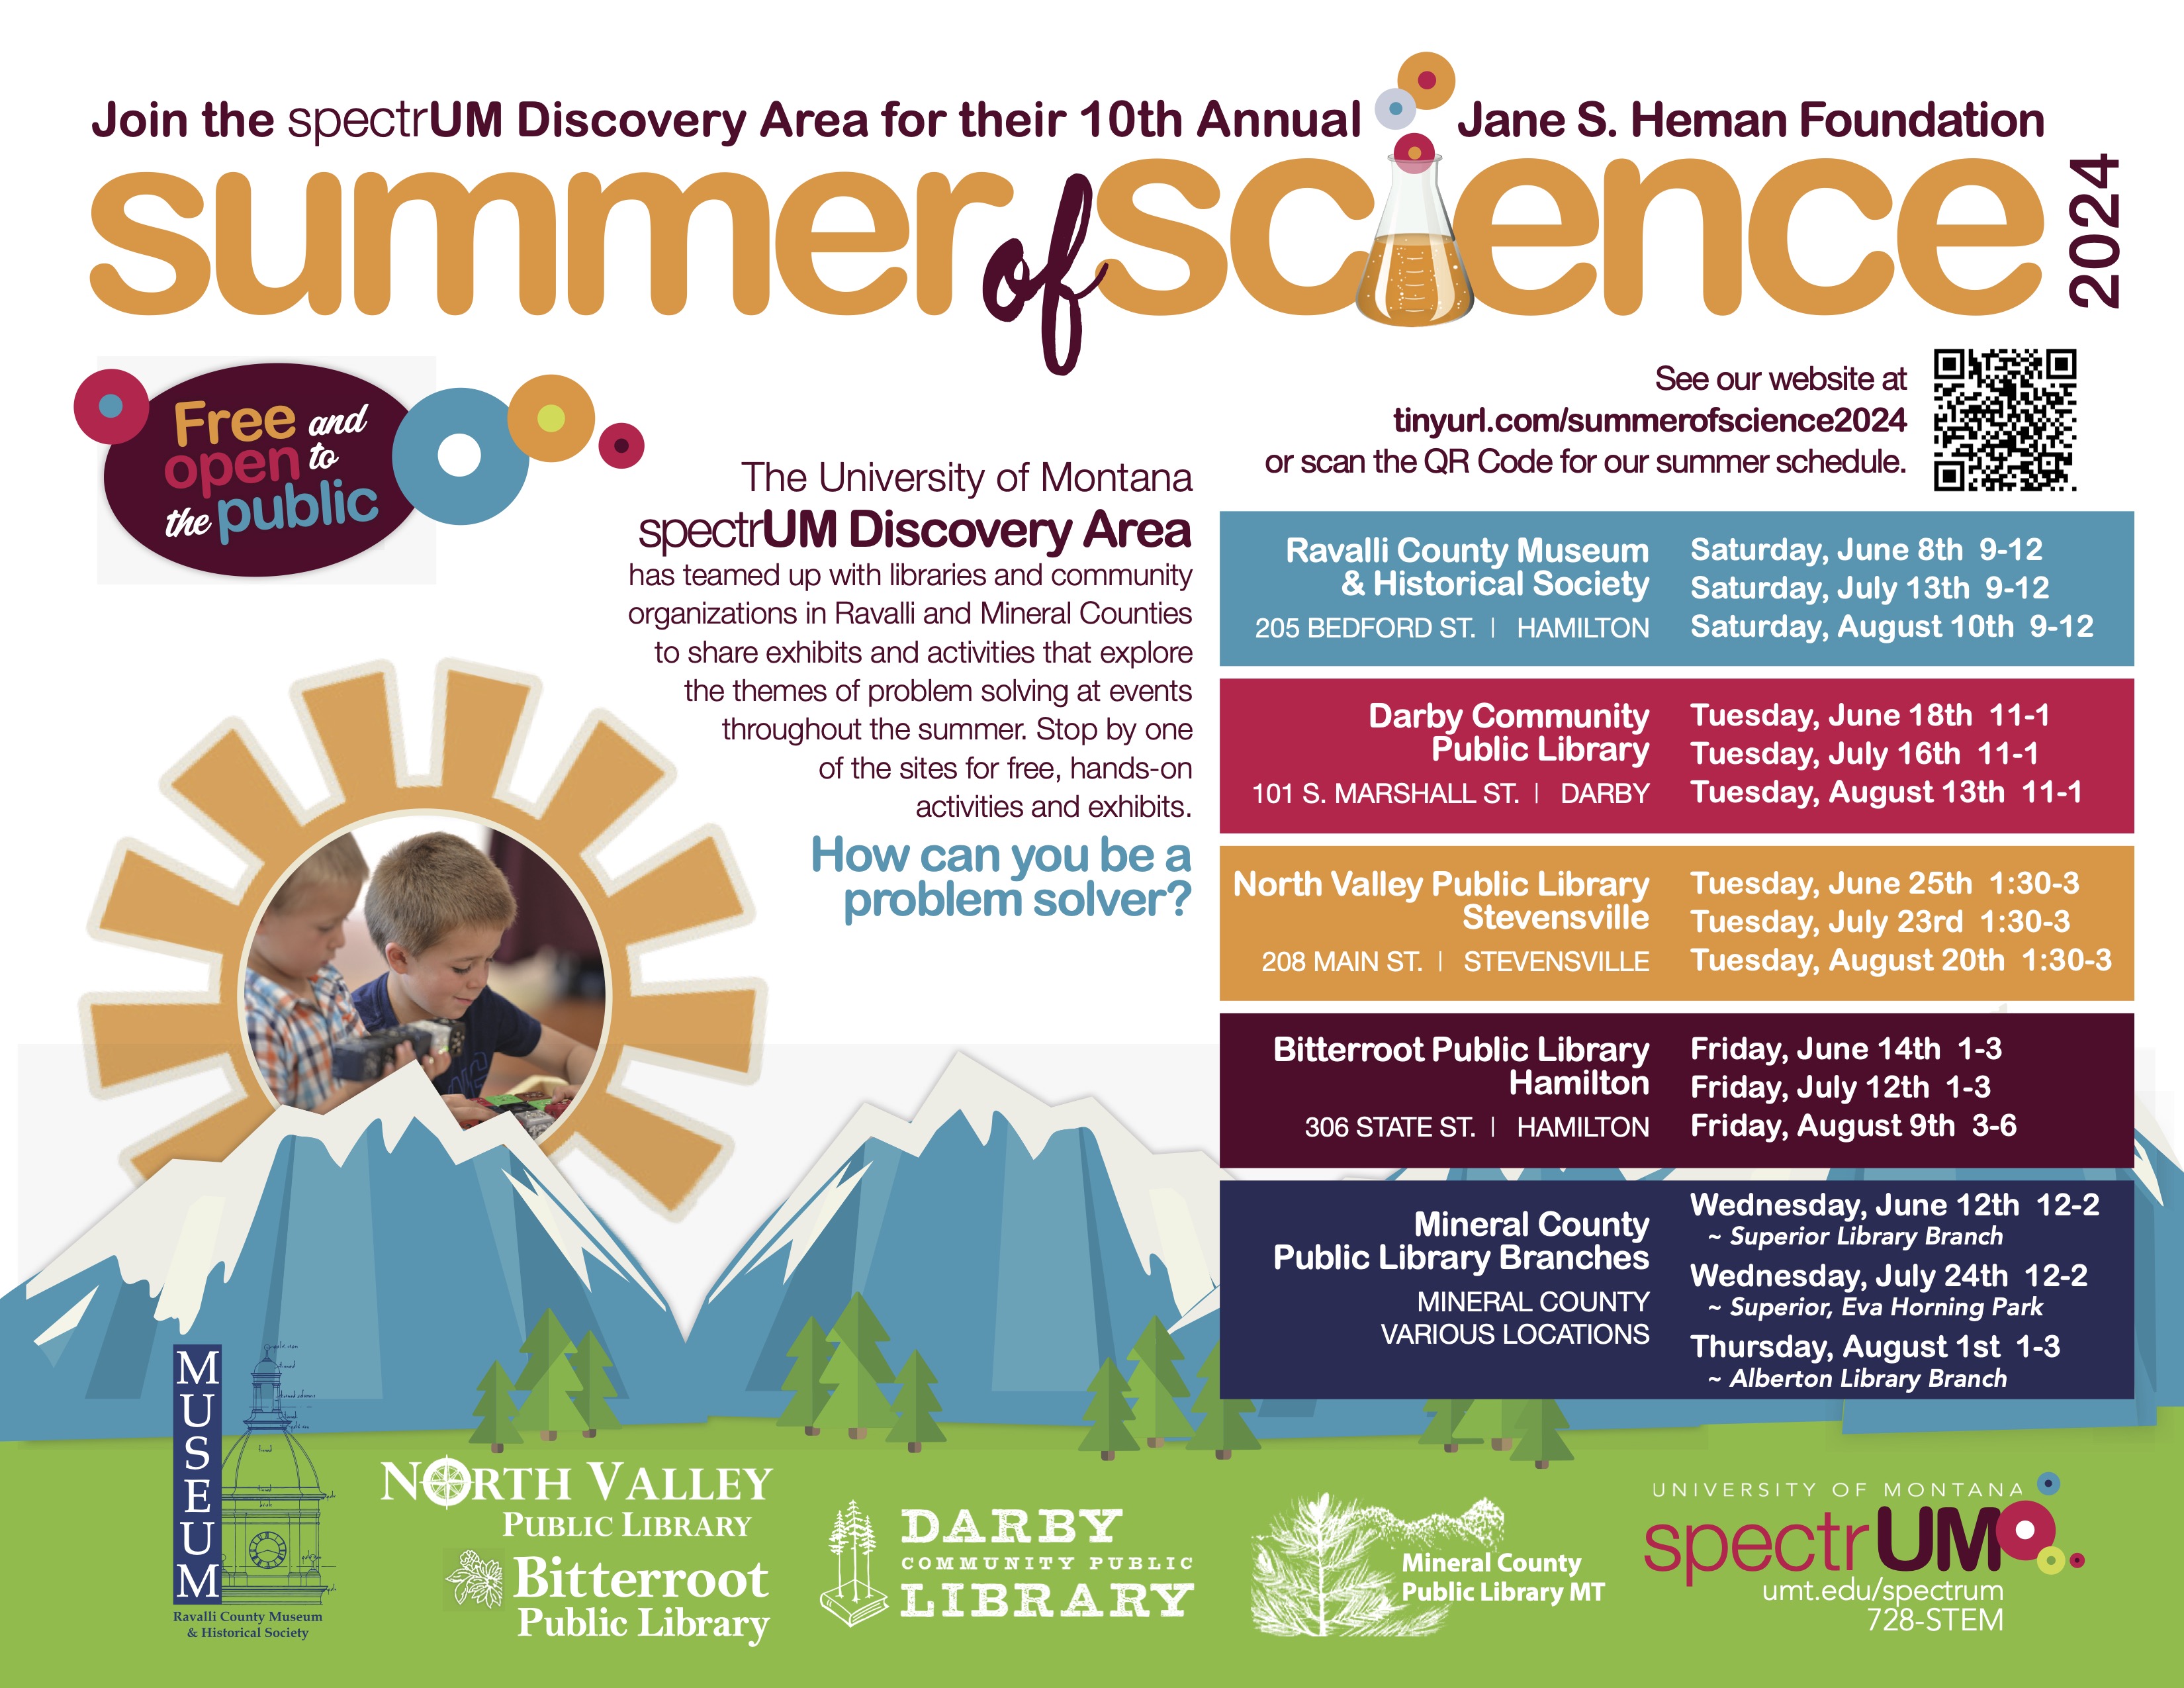 Summer of Science 2024 schedule of events